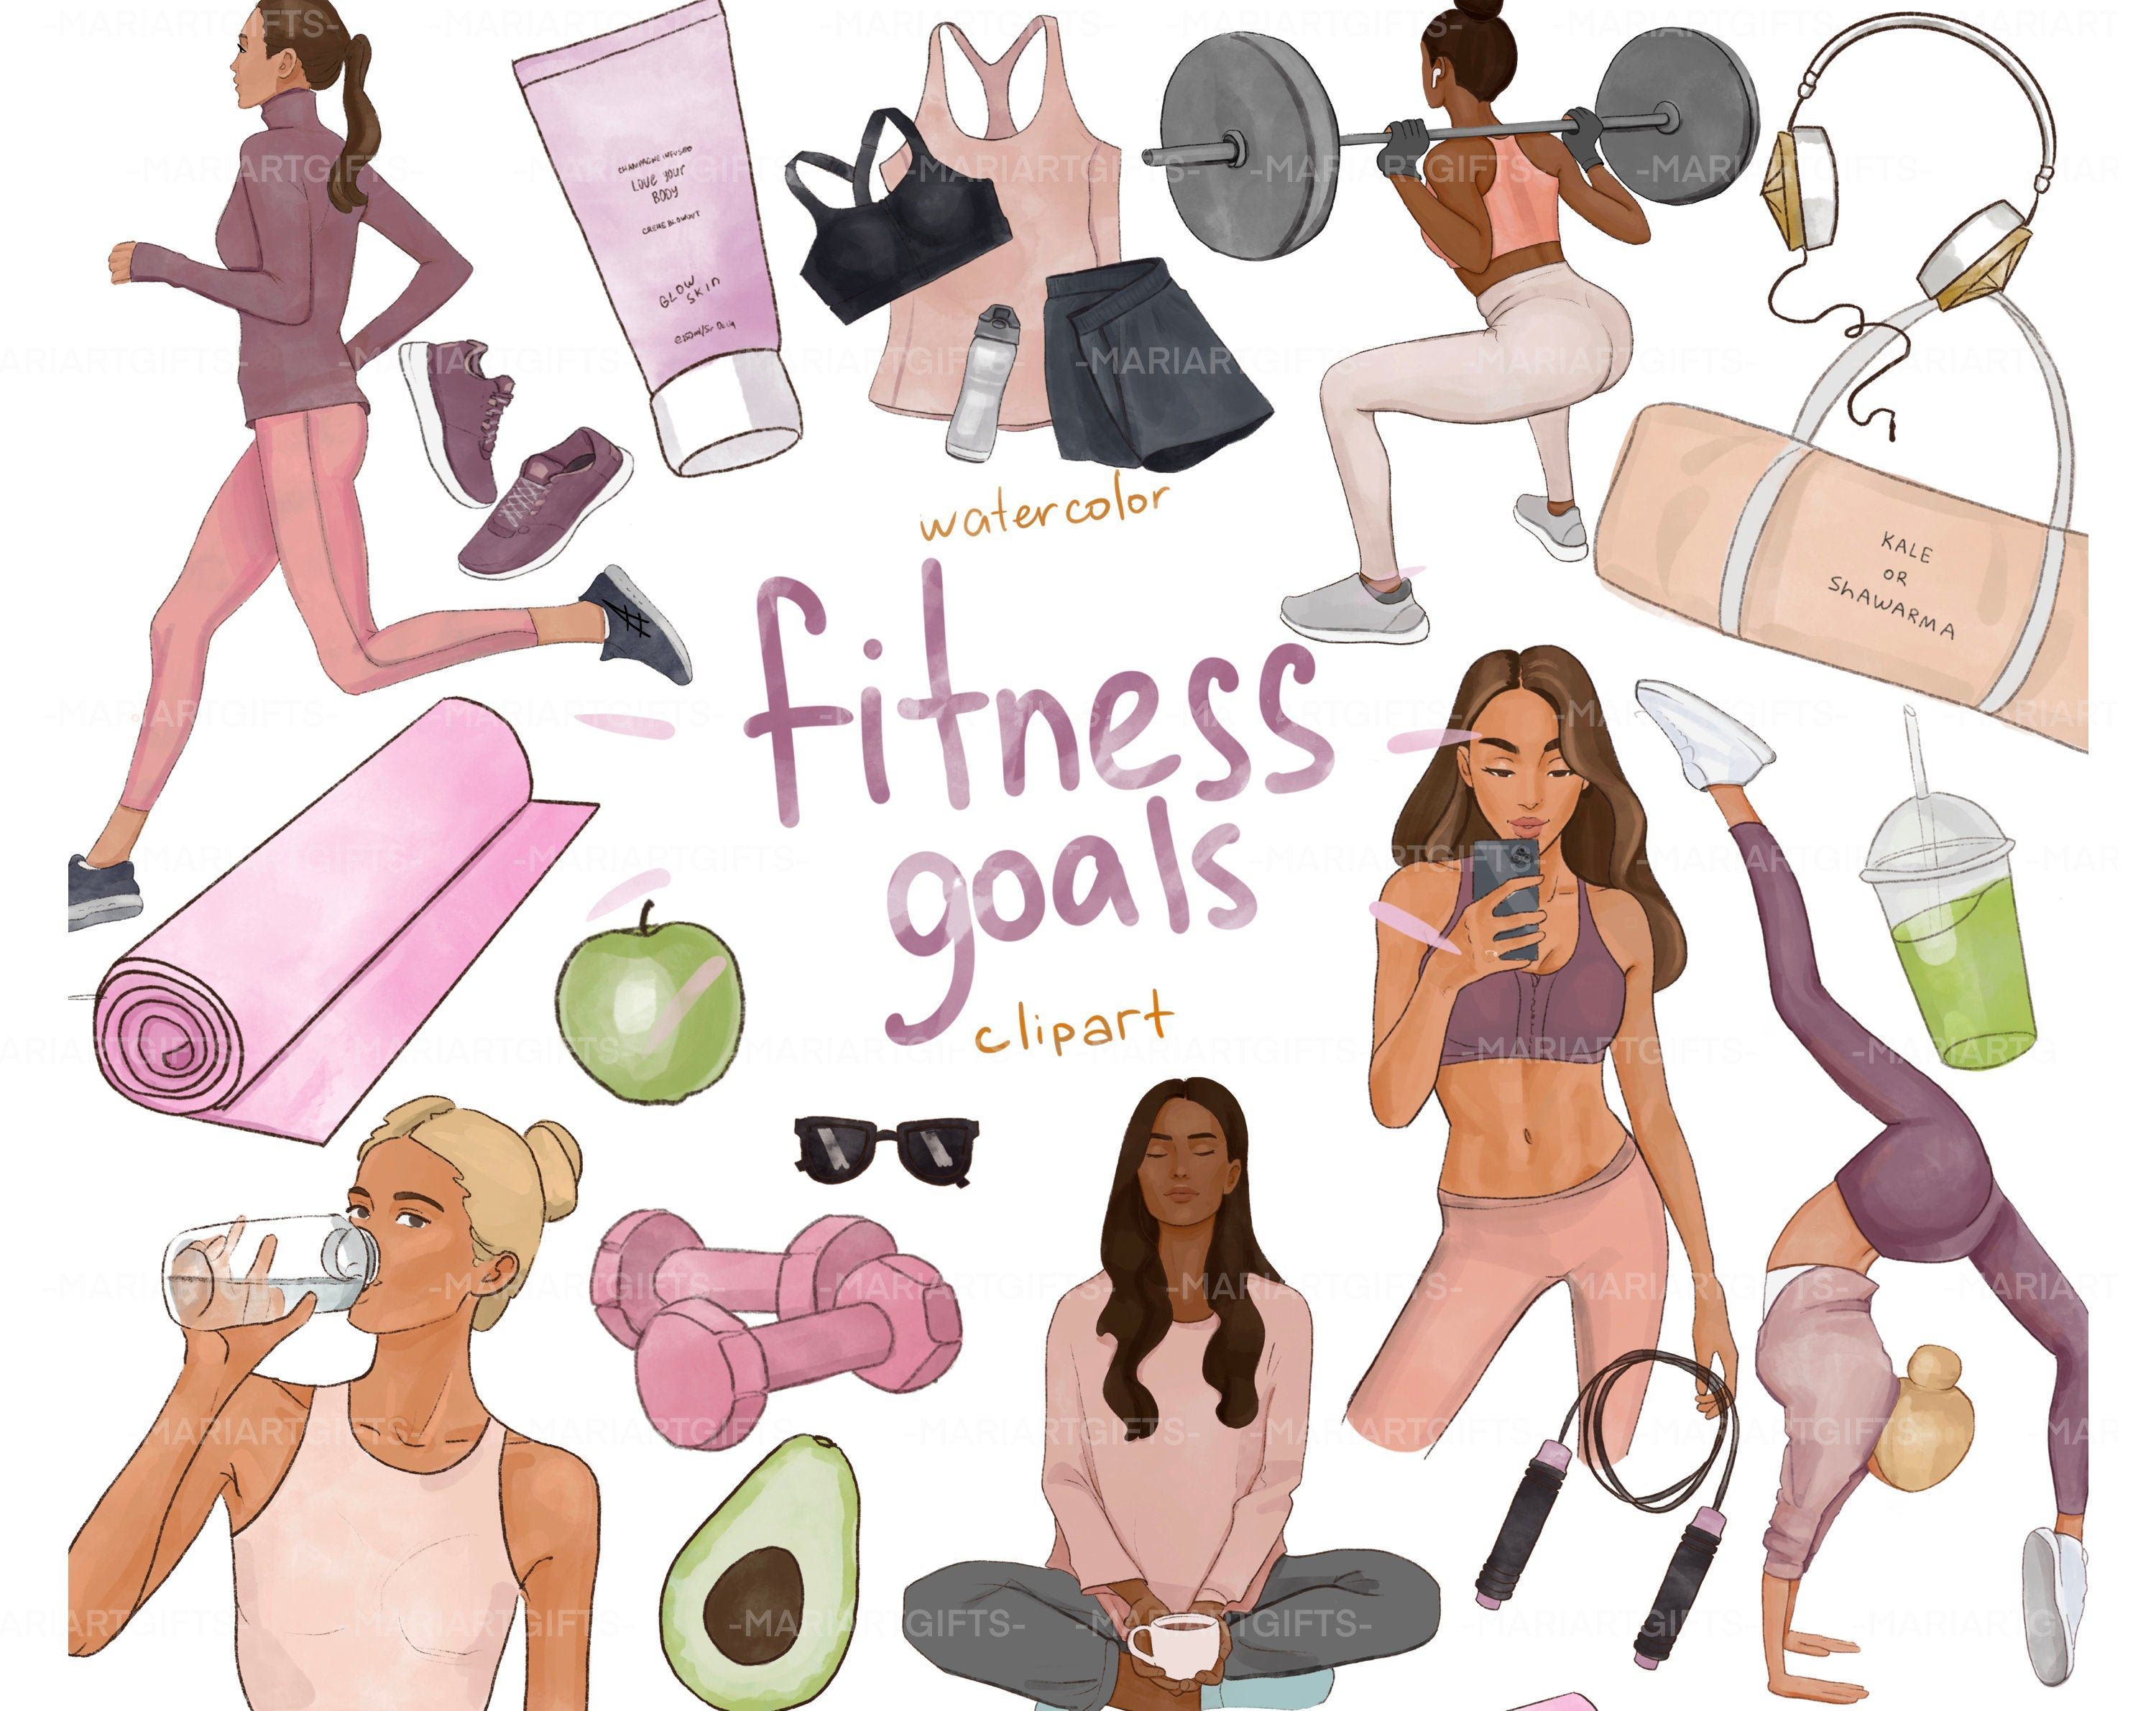 Fitness Clipart, Workout Clip Art, Yoga Clip Art, Fashion Illustration, Gym Equipment, gym clipart, fitness blogger, planner stickers - Fitness Clipart, Workout Clip Art, Yoga Clip Art, Fashion Illustration, Gym Equipment, gym clipart, fitness blogger, planner stickers -   14 fitness Illustration wallpaper ideas